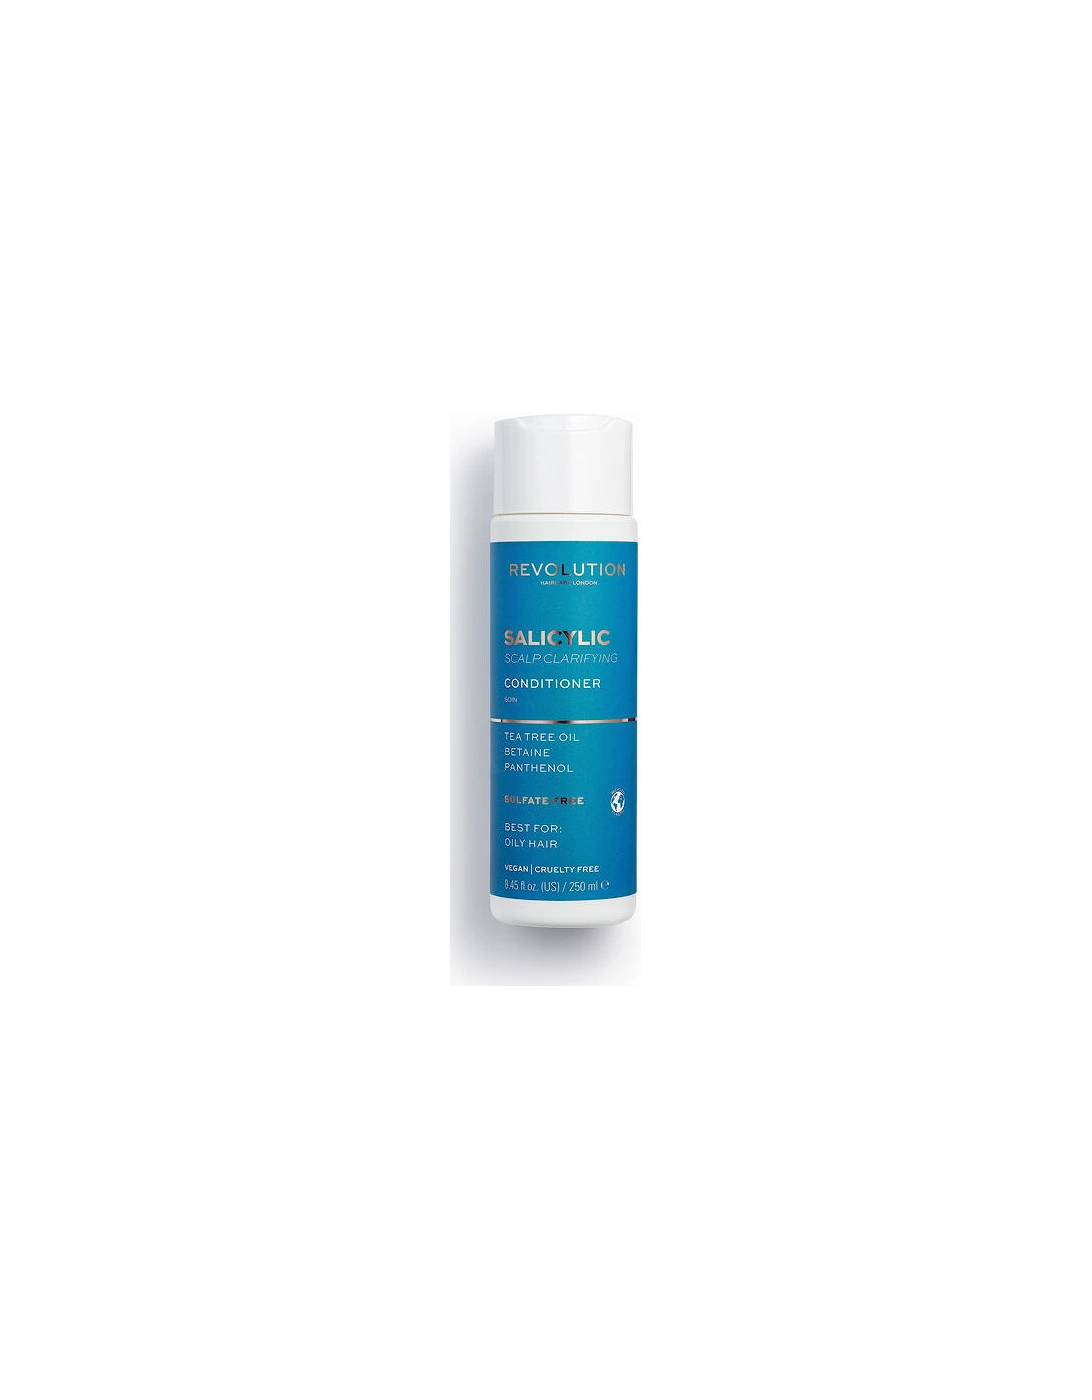 Haircare Salicylic Acid Clarifying Conditioner for Oily Hair, 2 of 1